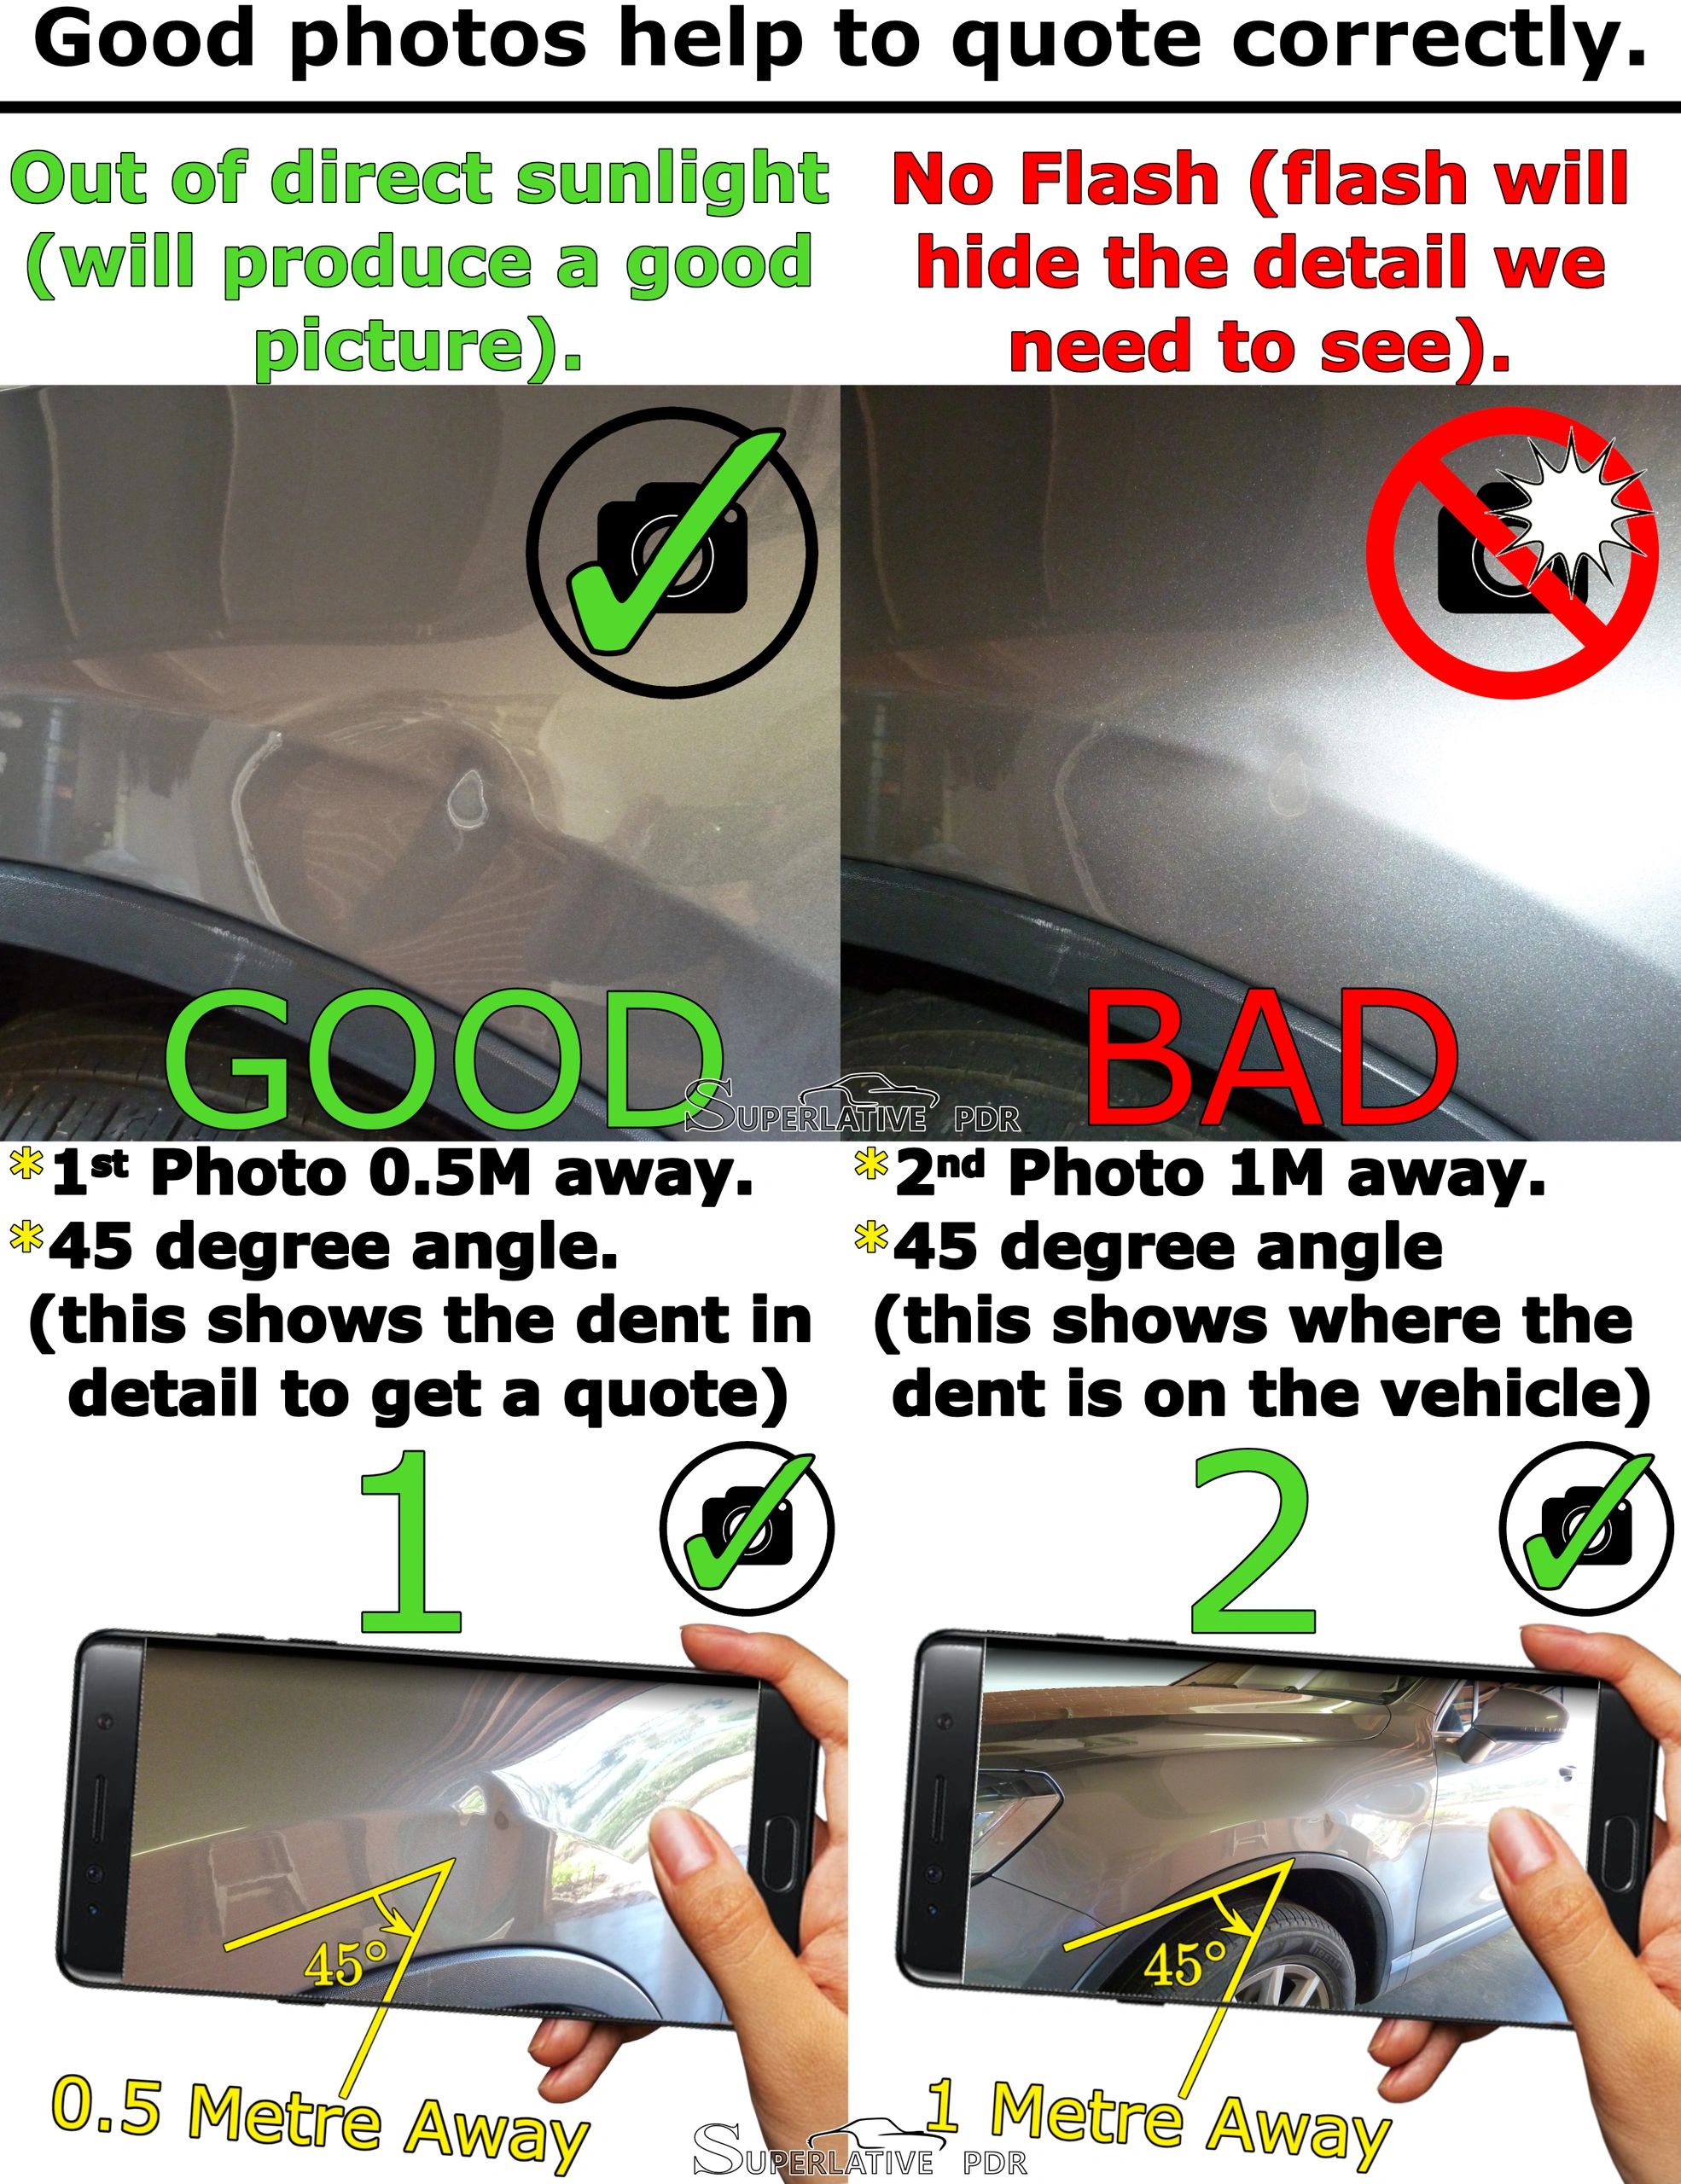 Good photos help to quote correctly.
https://dent-pdr.business.site
Paintless Dent Removal Perth